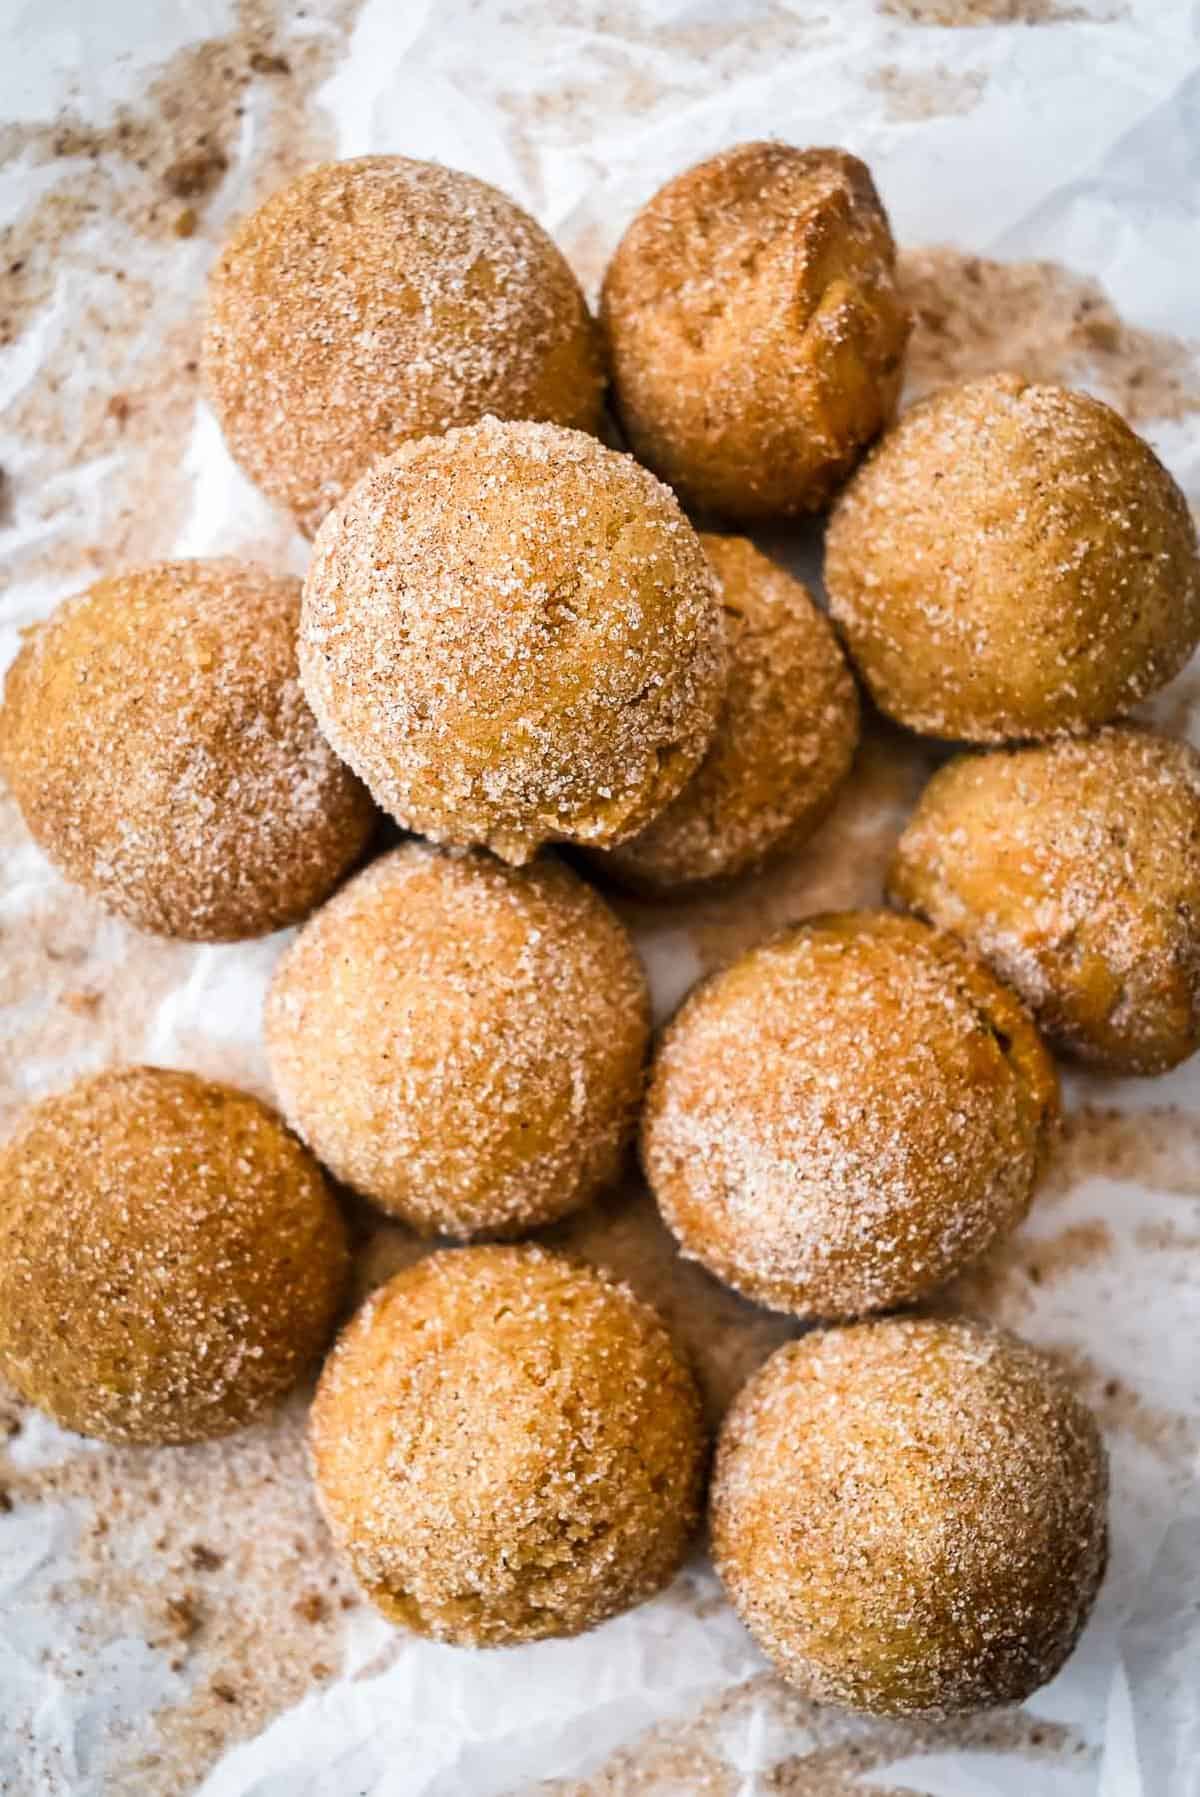 apple cider donut holes in a pile on white parchment paper with cinnamon sugar.